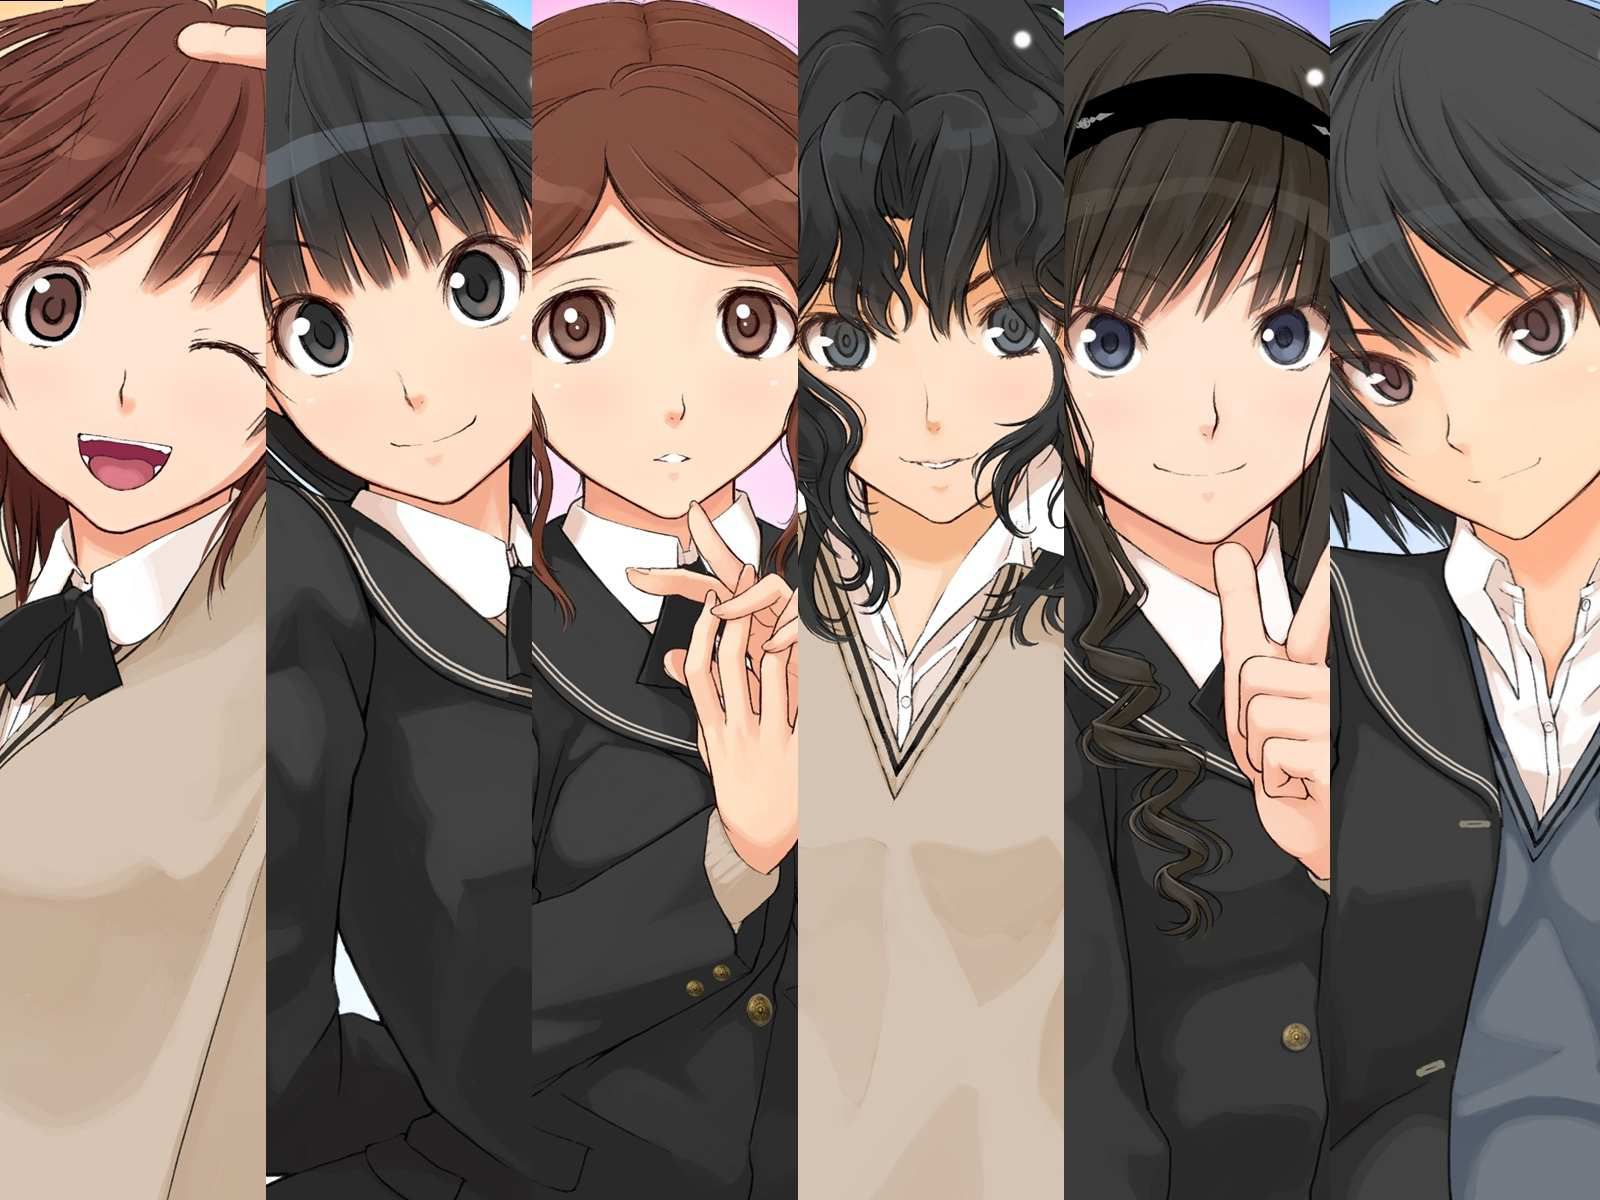 2 put up so you get full amagami hentai images for the time being 14